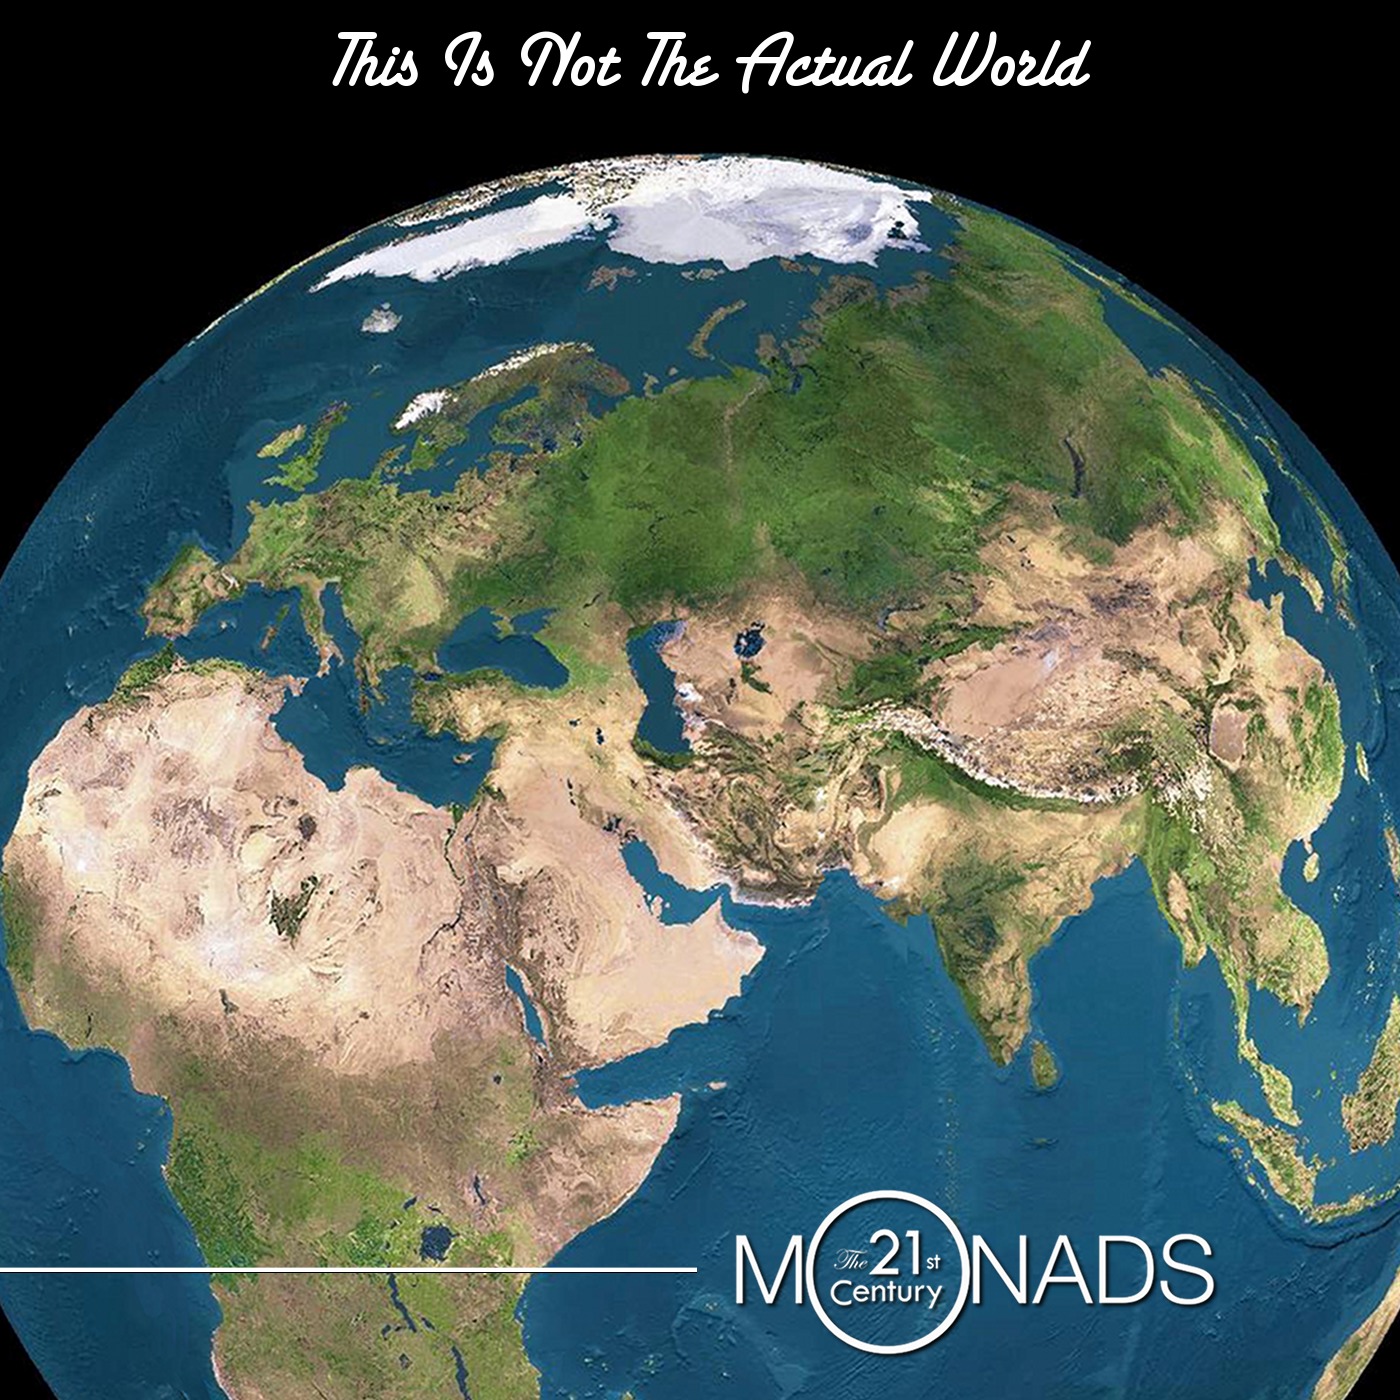 Album cover of "This Is Not The Actual World" shows the globe from outer space.